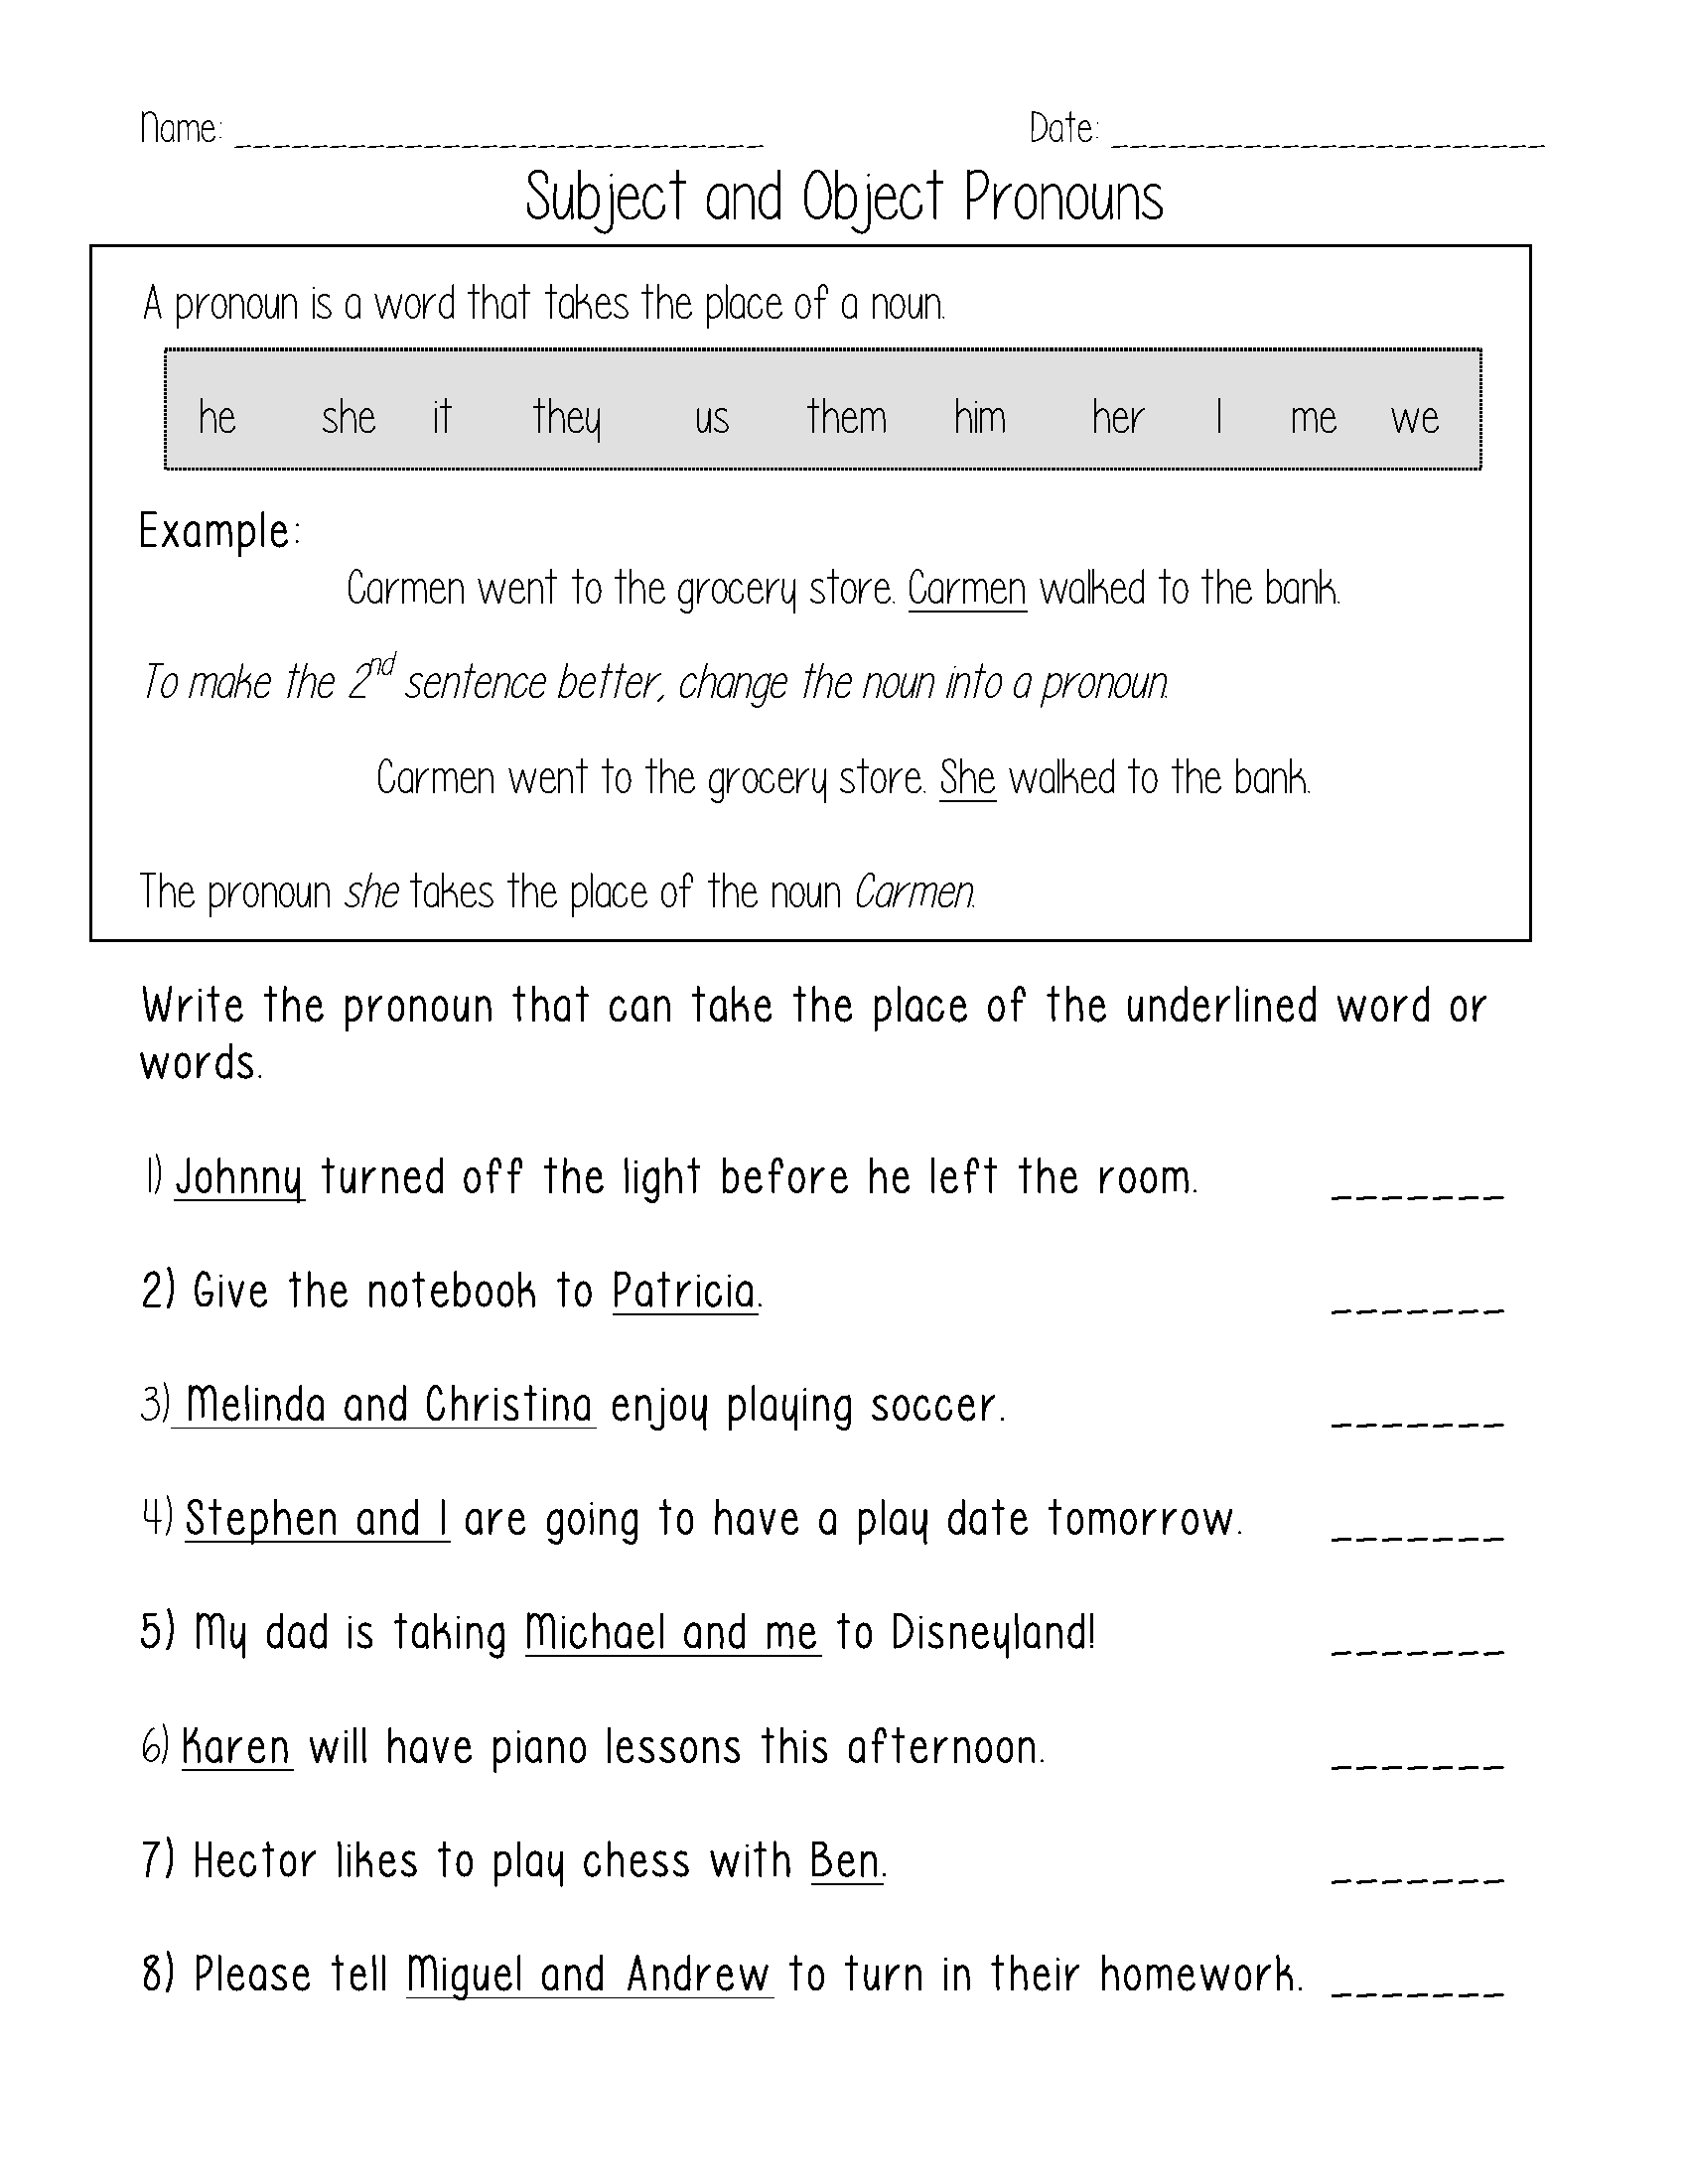 14 Best Images of Pronoun Contractions Worksheet - Contractions